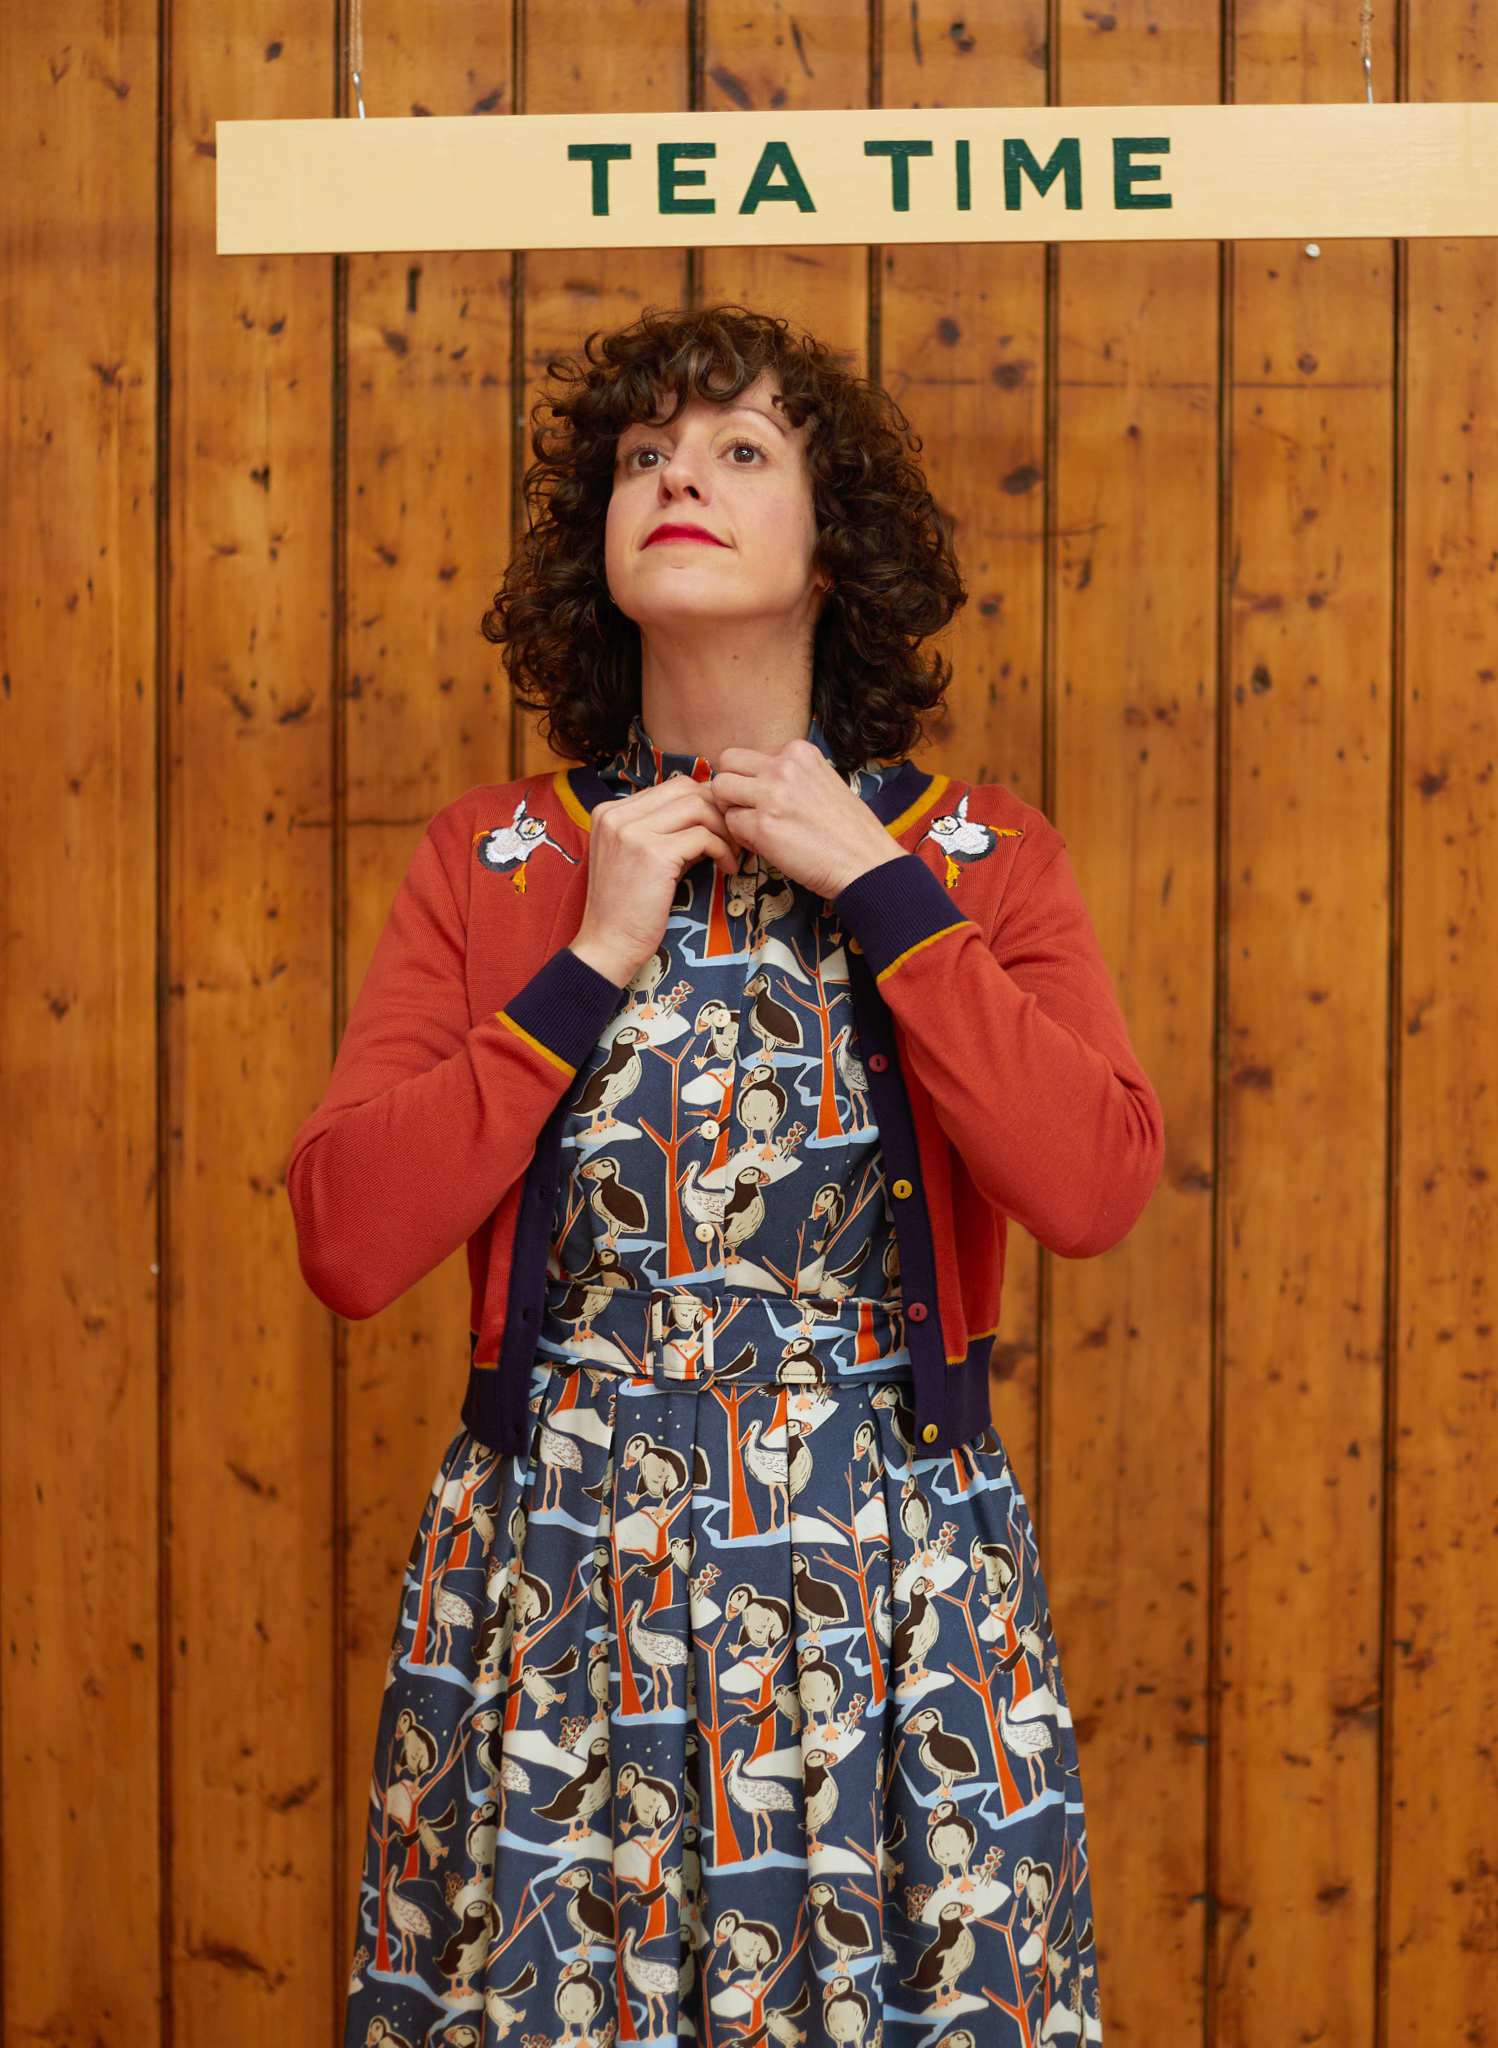 Vera - Rust Puffin Embroidered Cardigan